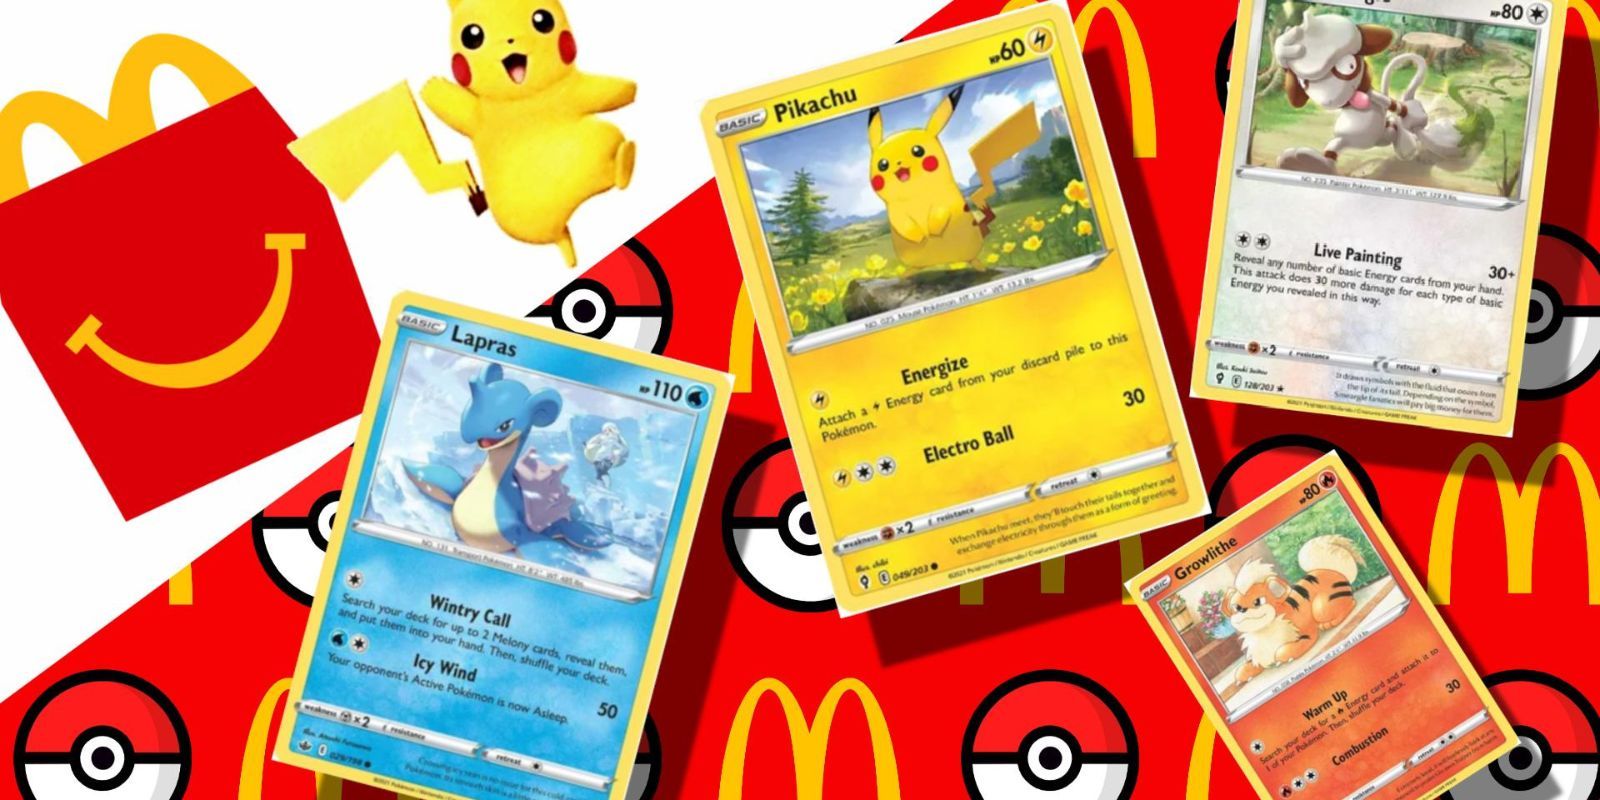 Manga McDonald's Pokémon Cards 2022: Which Cards Are Worth The Most 🍀